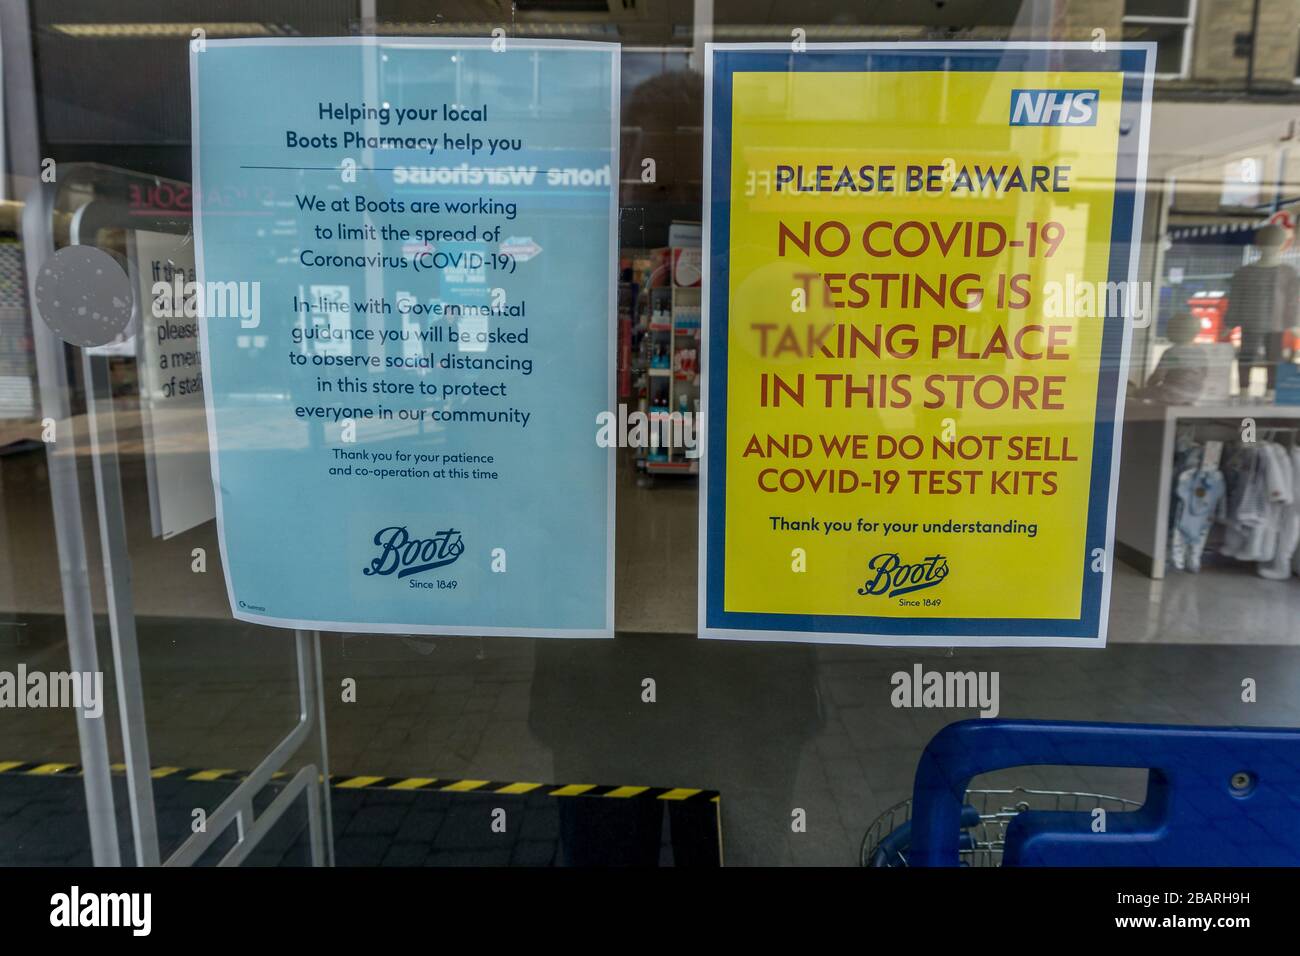 Covid 9 and coronovirus testing and warning signs, Boots, Huddersfield on Saturday morning 28th March 2020 during the lockdown due to the corono virus pandemic. Stock Photo